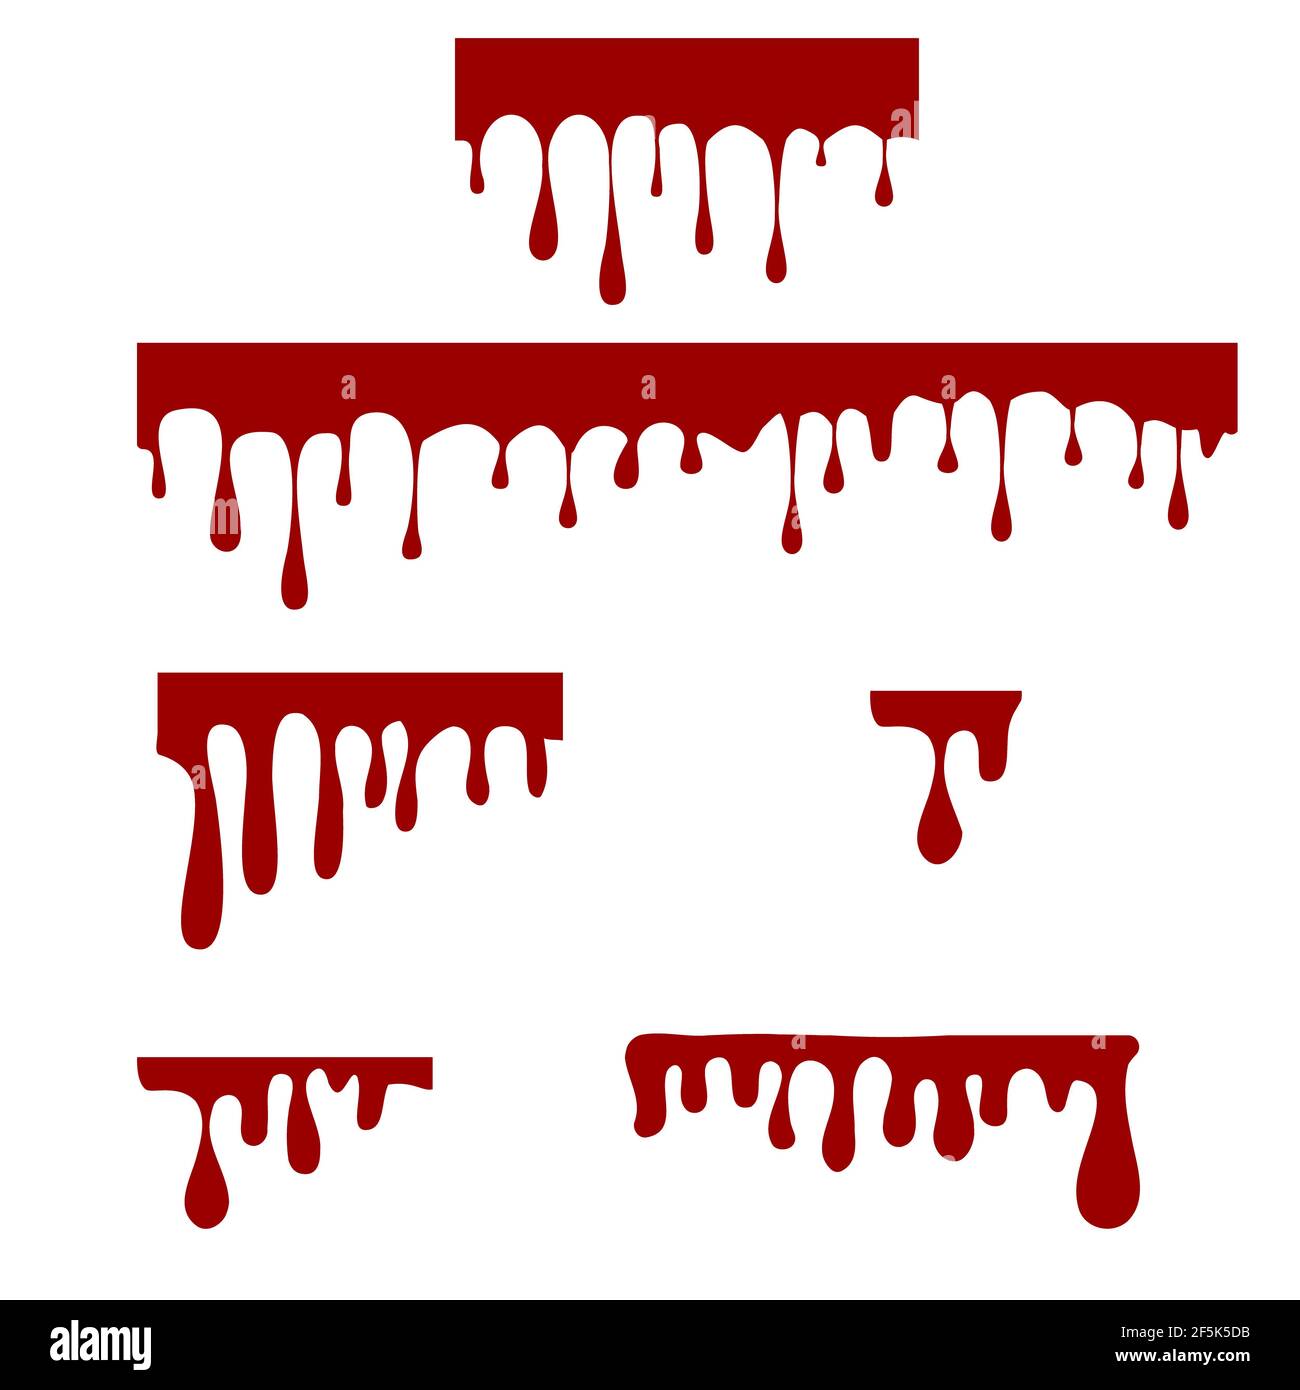 paint dripping on white background. dripping liquid sign. paint flows symbol. dripping blood logo. flat style. Stock Photo